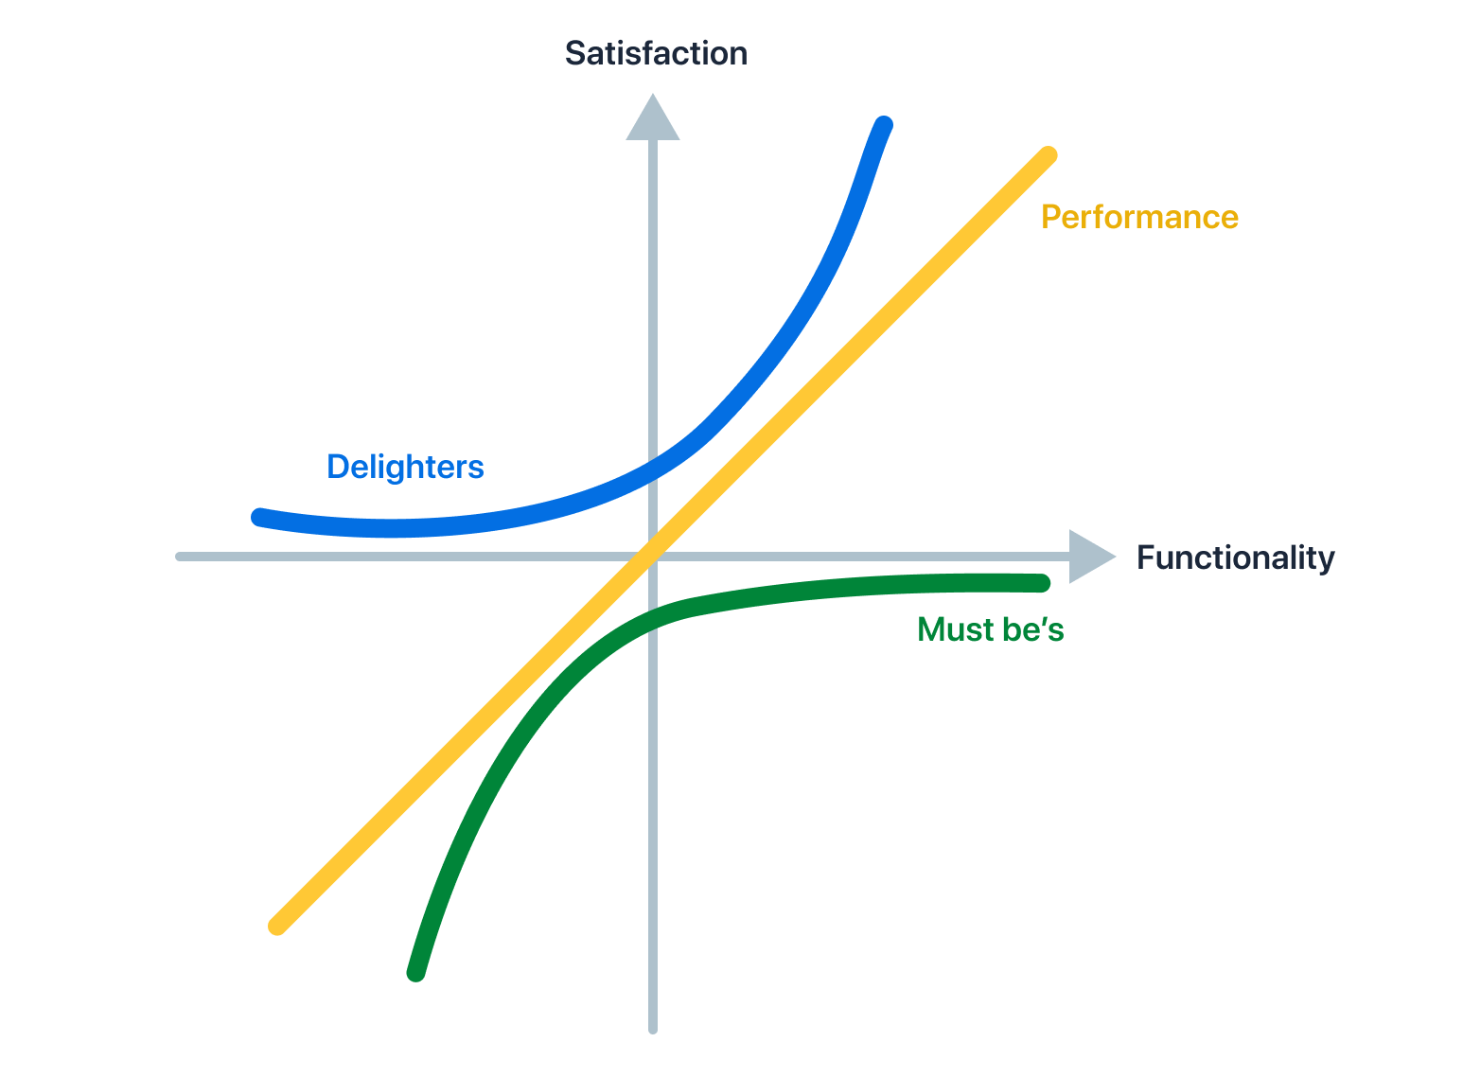 The Kano model elegantly explains how delight impacts products. The Kano model of product development and customer satisfaction was first published in 1984 by Dr. Noriaki Kano, professor of quality management at the Tokyo University of Science. 